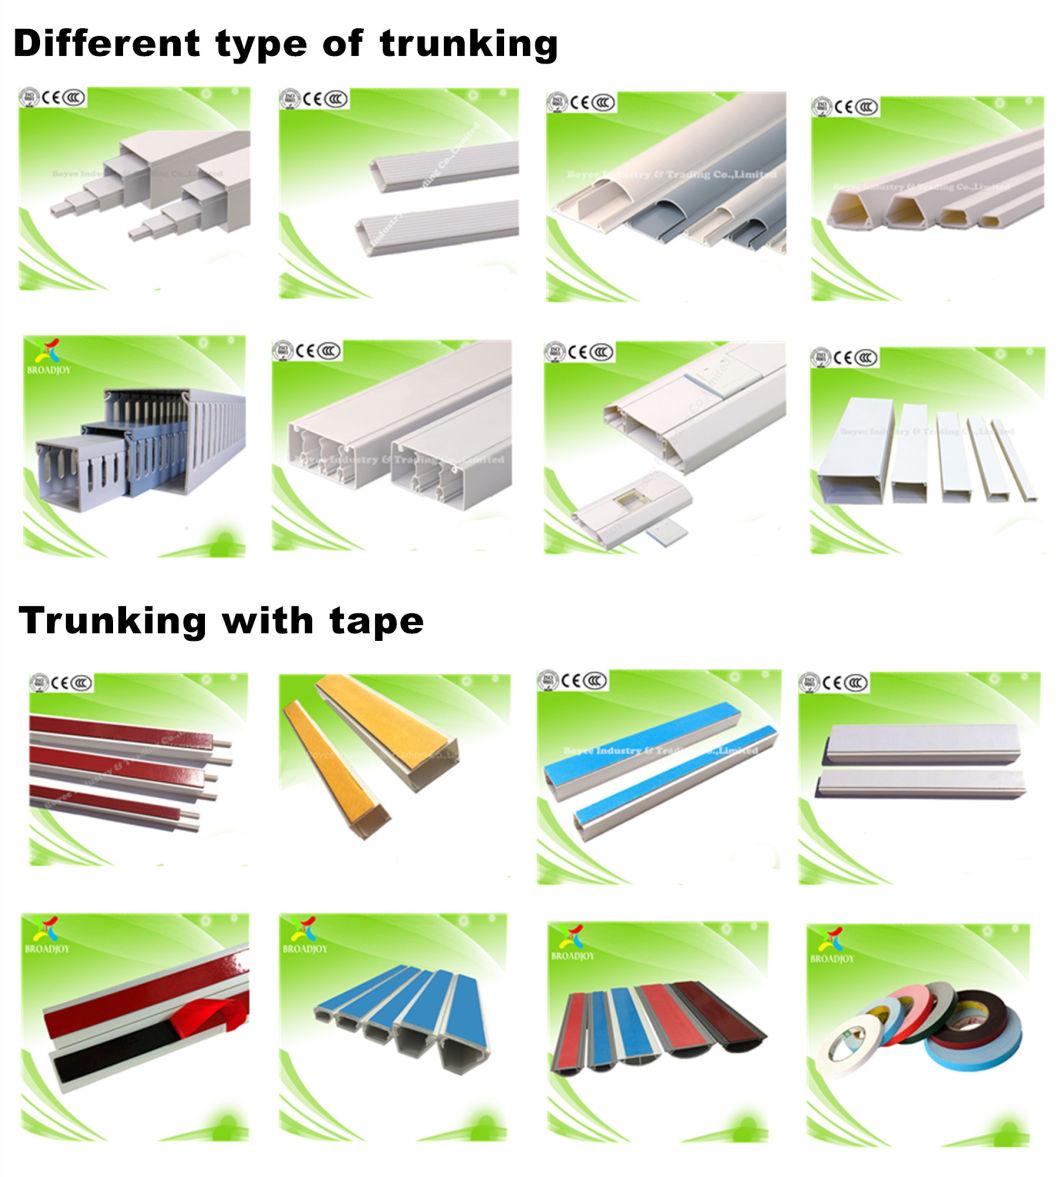 Cable Protector Floor & Wall Type, Rigid, Durable. Wire Raceway, Cord Concealer, Self Adhesive Cable Management Kit